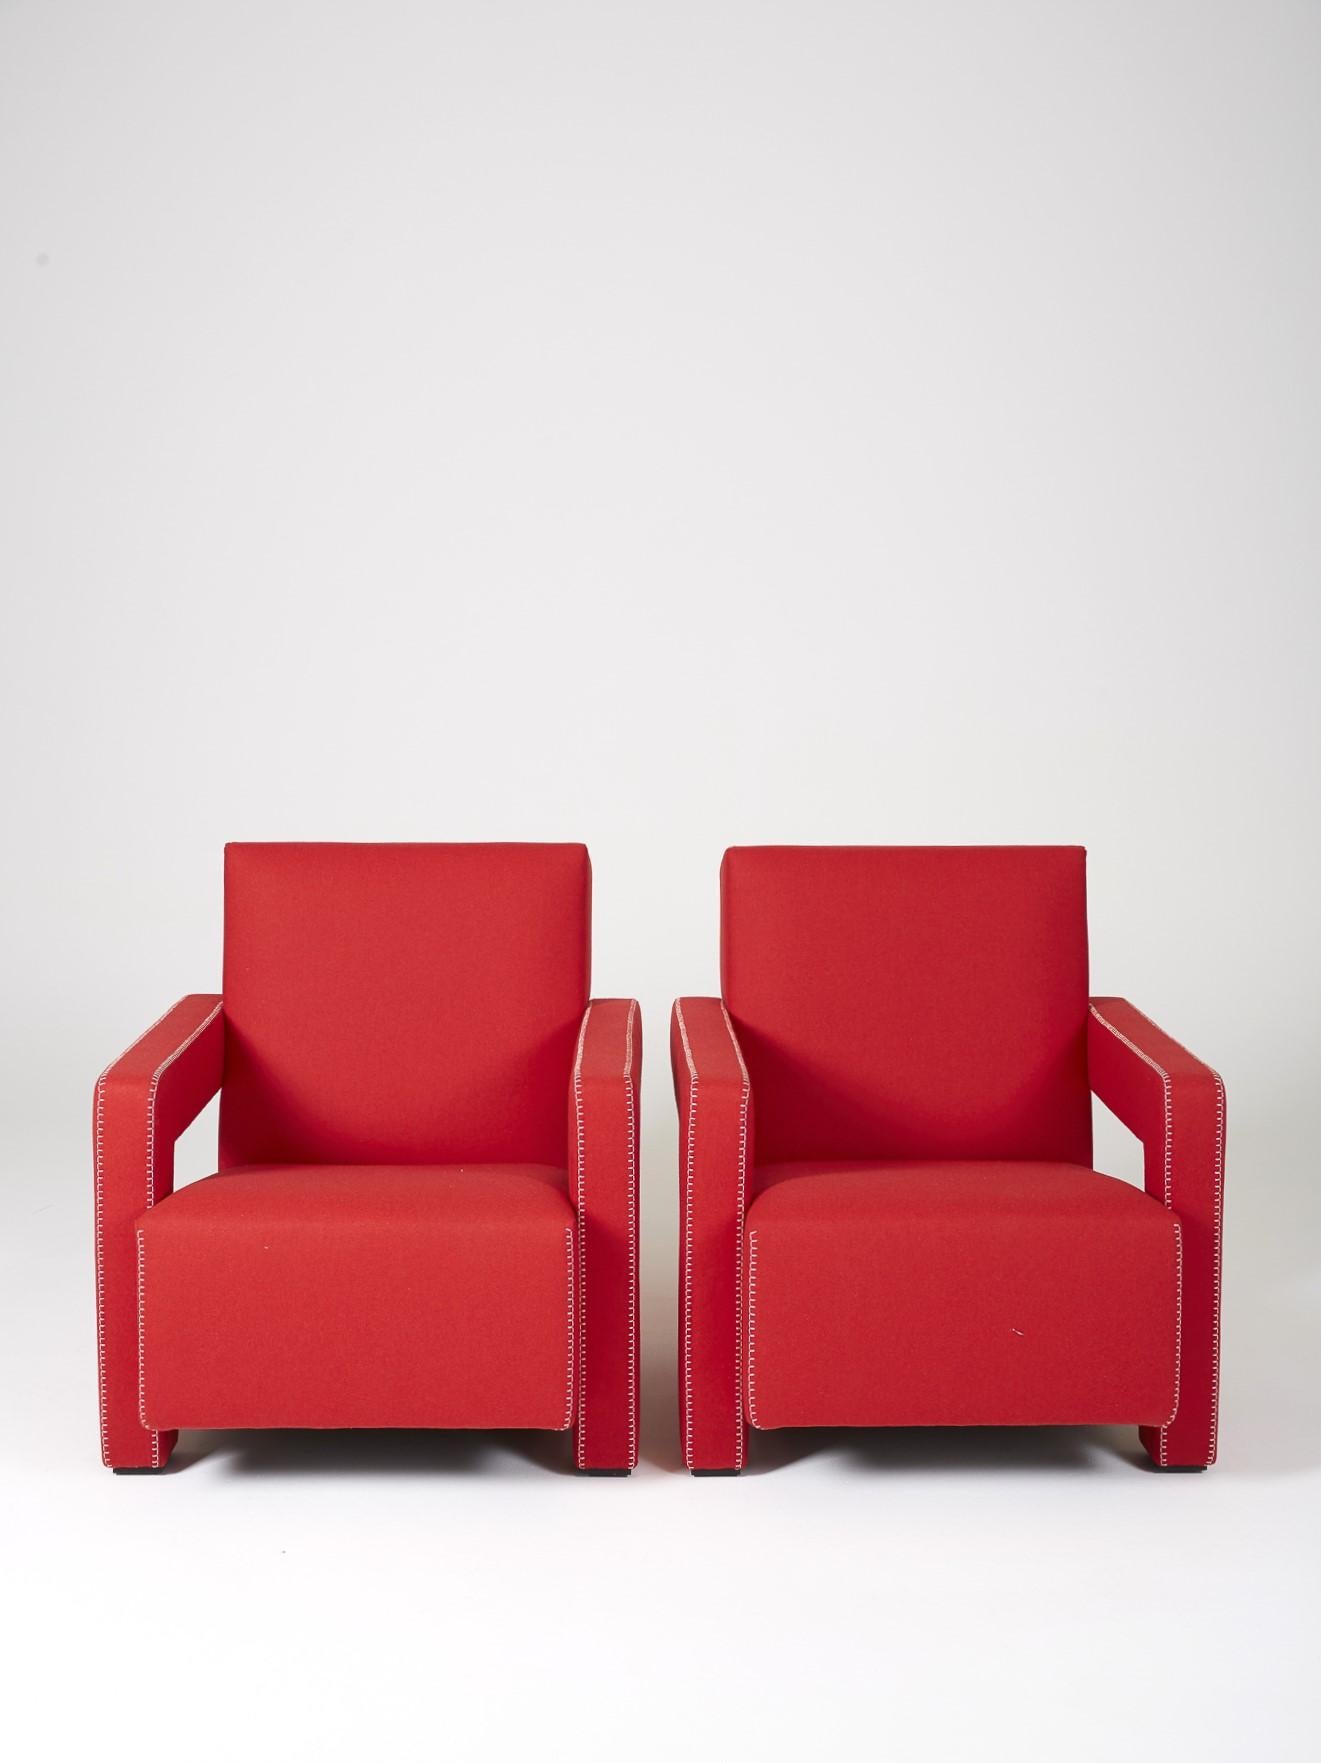 Pair of armchairs 637 Utrecht by Gerrit Thomas Rietveld for Cassina, recent edition. Structure covered with red fabric. Comfortable seat. Excellent condition.